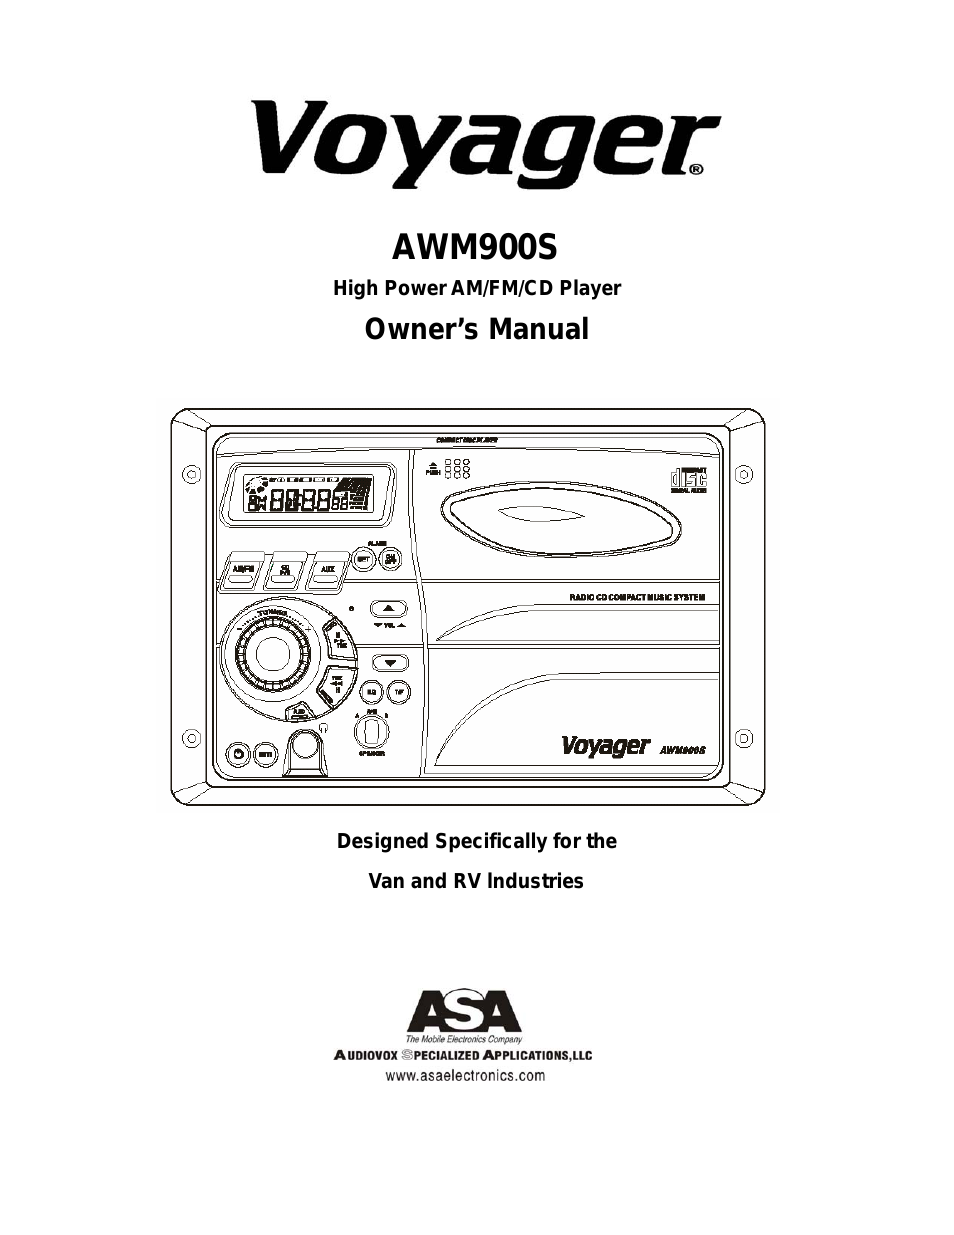 VOYAGER AWM900S